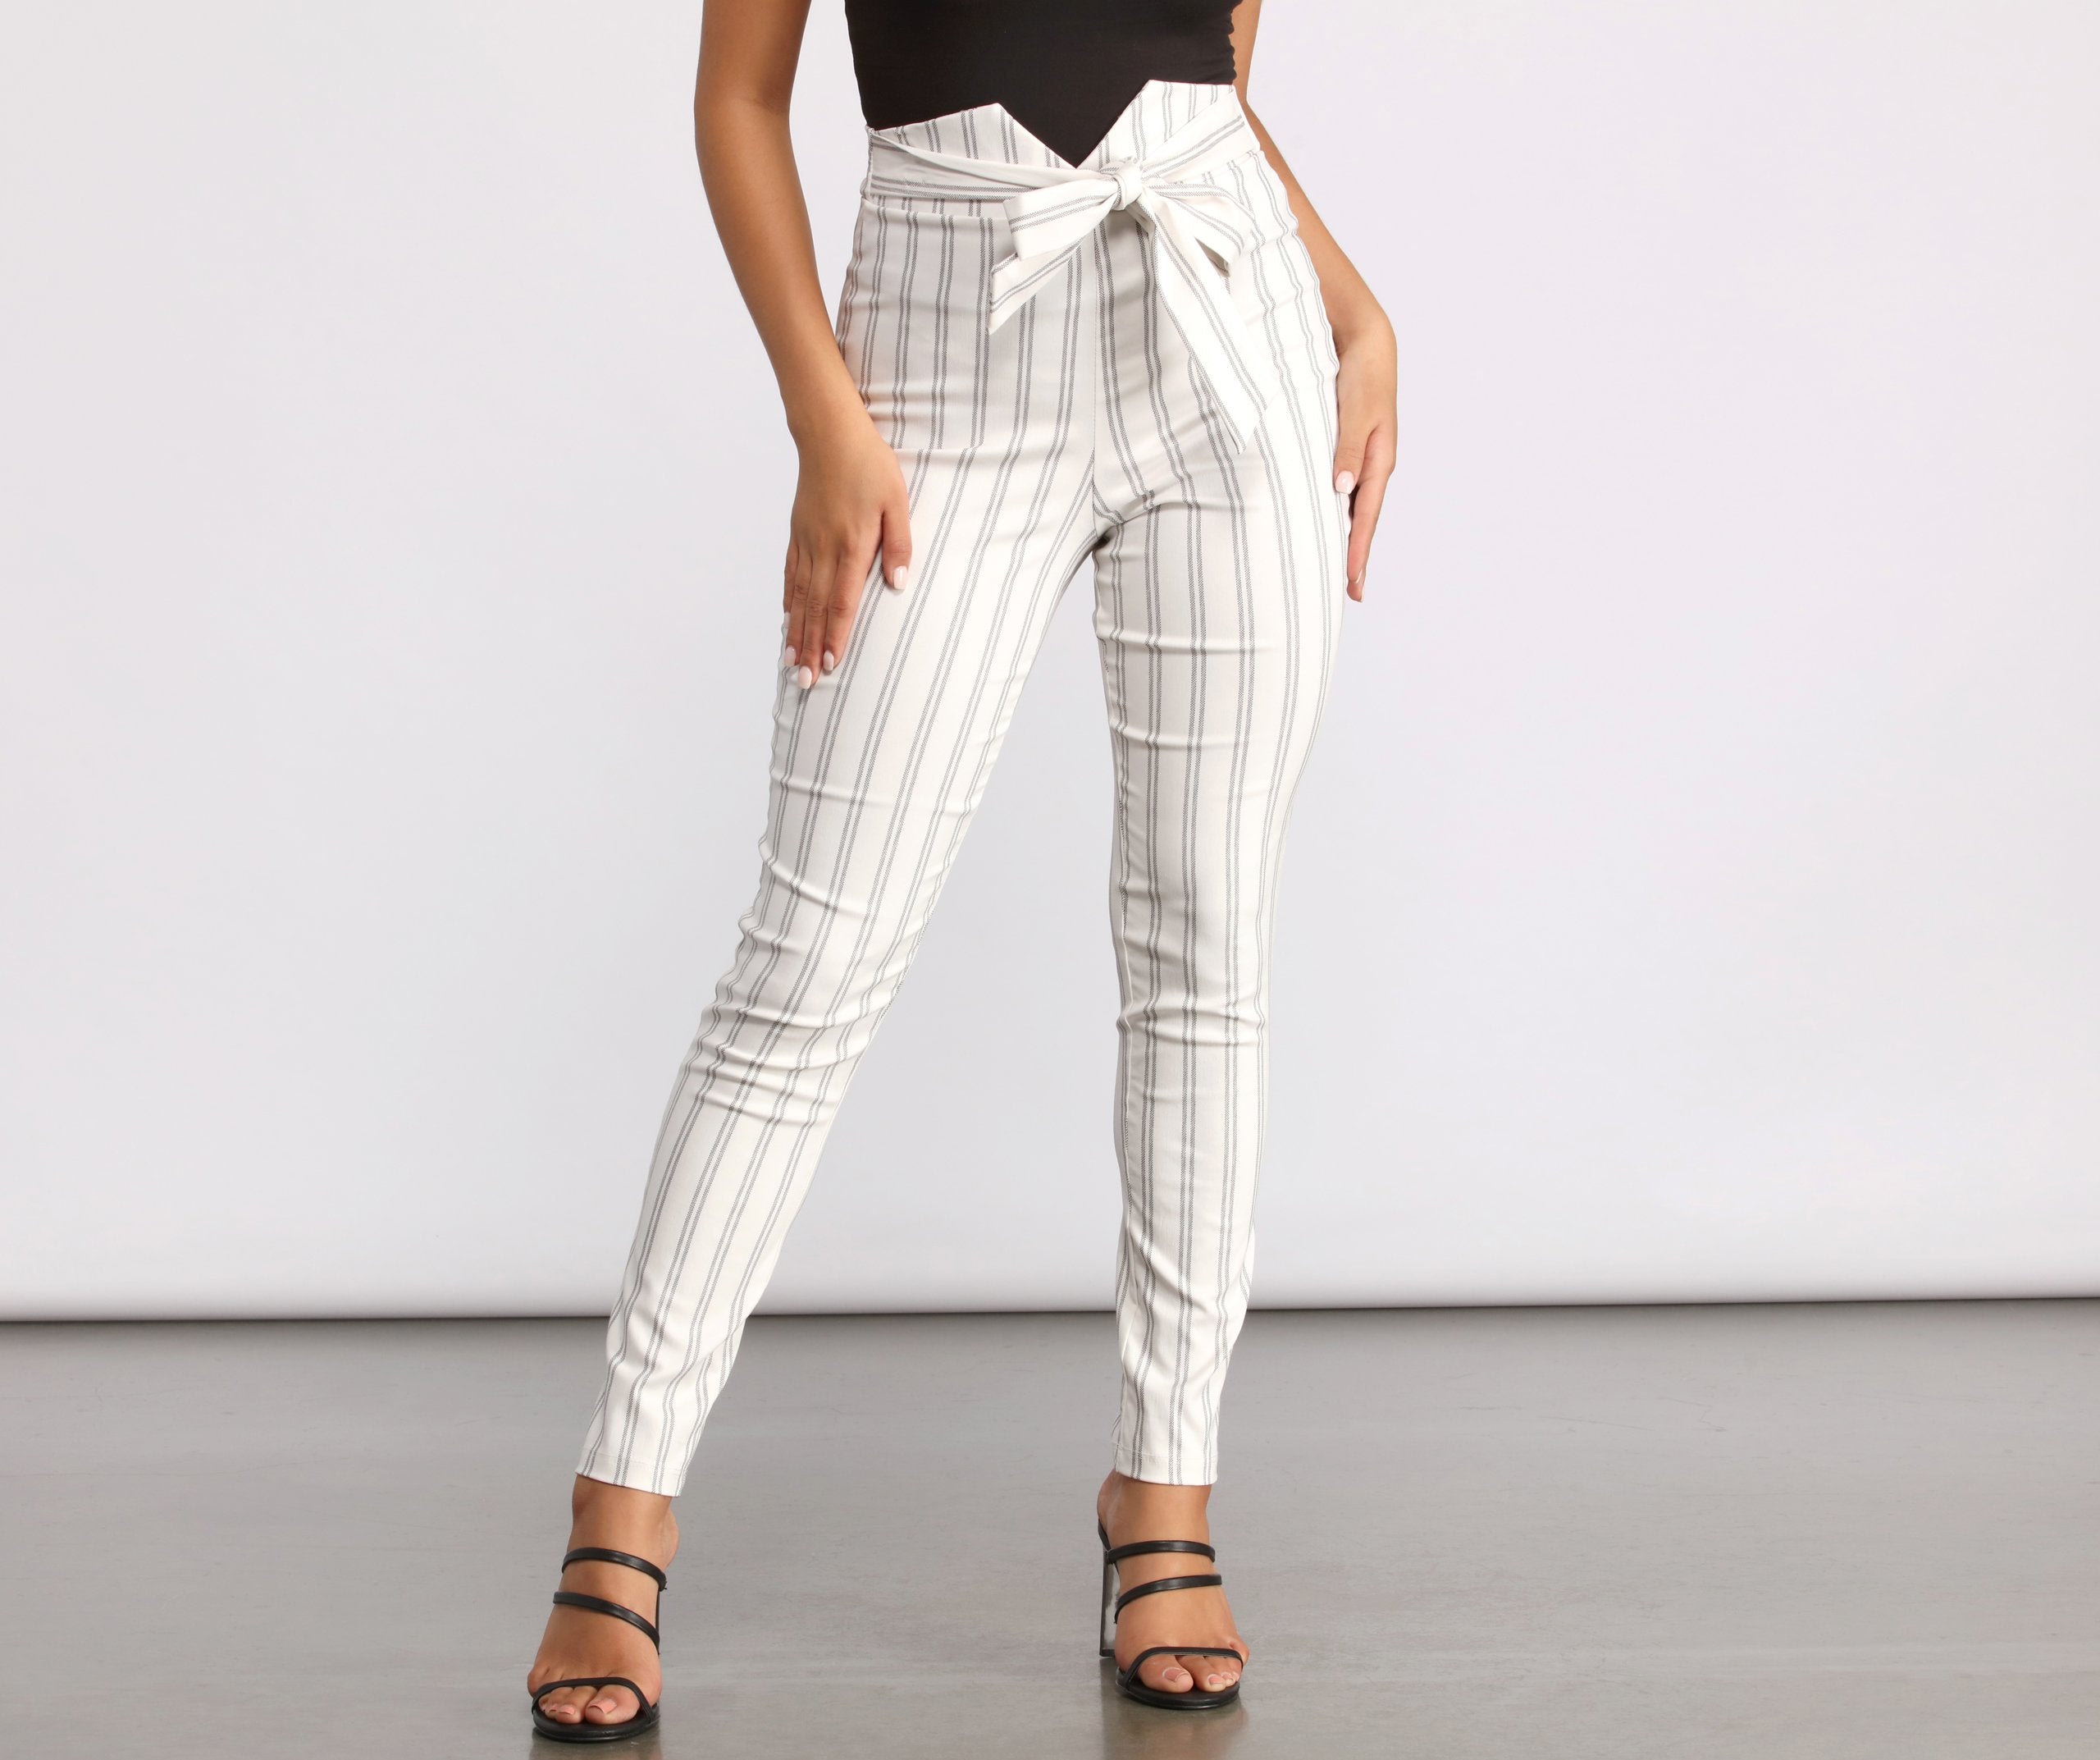 High Waist Double Striped Skinny Dress Pants - Lady Occasions